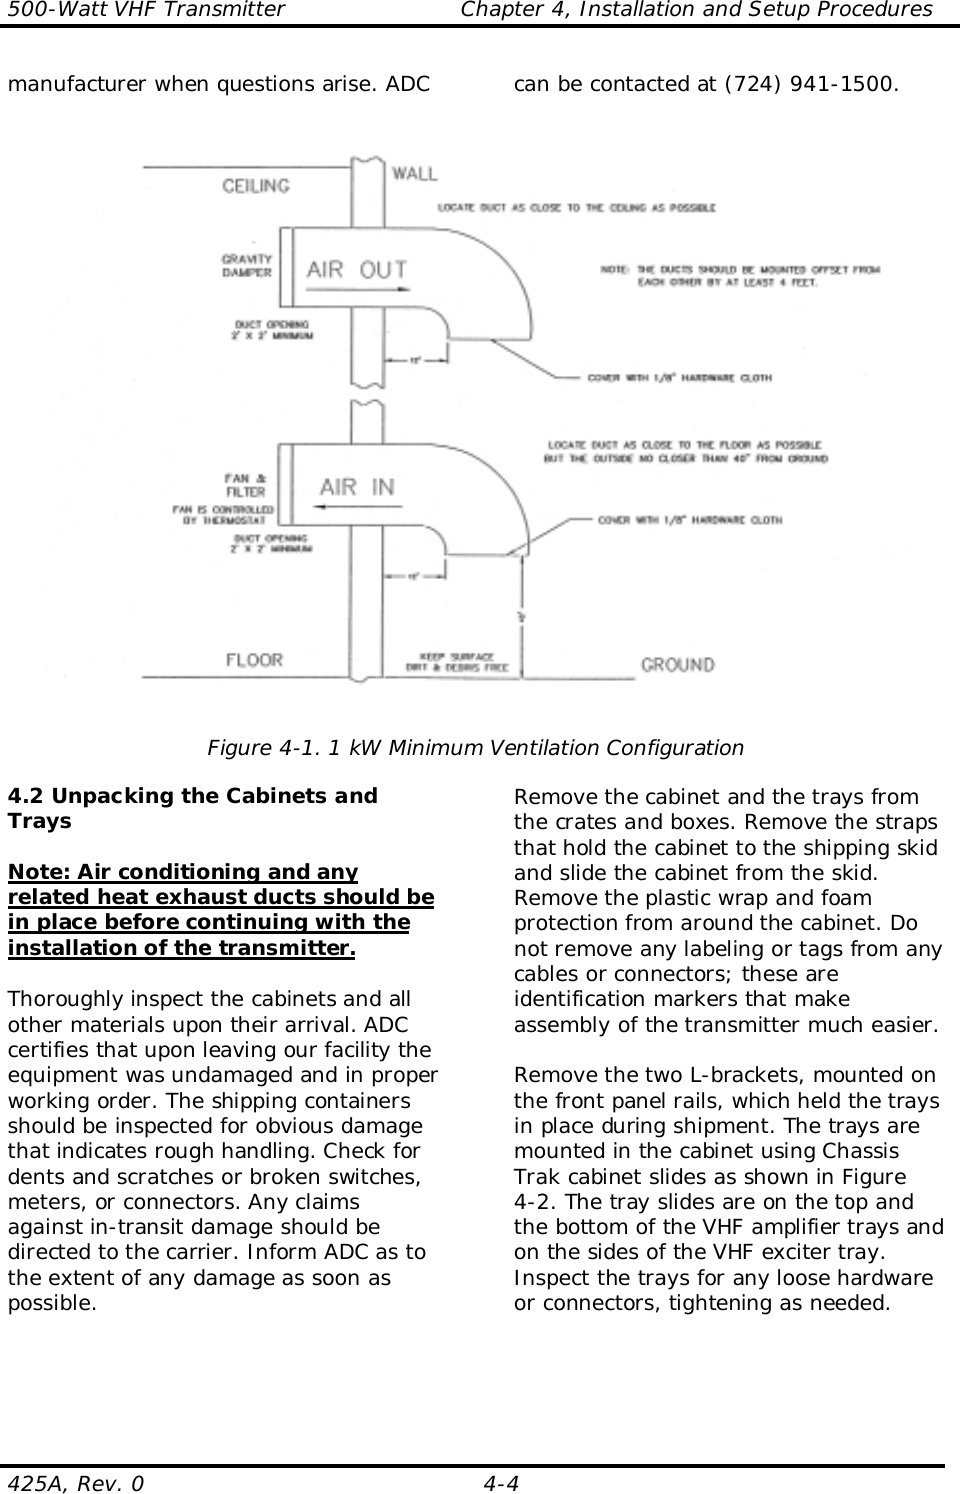 500-Watt VHF Transmitter                        Chapter 4, Installation and Setup Procedures425A, Rev. 0  4-4manufacturer when questions arise. ADC can be contacted at (724) 941-1500.Figure 4-1. 1 kW Minimum Ventilation Configuration4.2 Unpacking the Cabinets andTraysNote: Air conditioning and anyrelated heat exhaust ducts should bein place before continuing with theinstallation of the transmitter.Thoroughly inspect the cabinets and allother materials upon their arrival. ADCcertifies that upon leaving our facility theequipment was undamaged and in properworking order. The shipping containersshould be inspected for obvious damagethat indicates rough handling. Check fordents and scratches or broken switches,meters, or connectors. Any claimsagainst in-transit damage should bedirected to the carrier. Inform ADC as tothe extent of any damage as soon aspossible.Remove the cabinet and the trays fromthe crates and boxes. Remove the strapsthat hold the cabinet to the shipping skidand slide the cabinet from the skid.Remove the plastic wrap and foamprotection from around the cabinet. Donot remove any labeling or tags from anycables or connectors; these areidentification markers that makeassembly of the transmitter much easier.Remove the two L-brackets, mounted onthe front panel rails, which held the traysin place during shipment. The trays aremounted in the cabinet using ChassisTrak cabinet slides as shown in Figure4-2. The tray slides are on the top andthe bottom of the VHF amplifier trays andon the sides of the VHF exciter tray.Inspect the trays for any loose hardwareor connectors, tightening as needed.